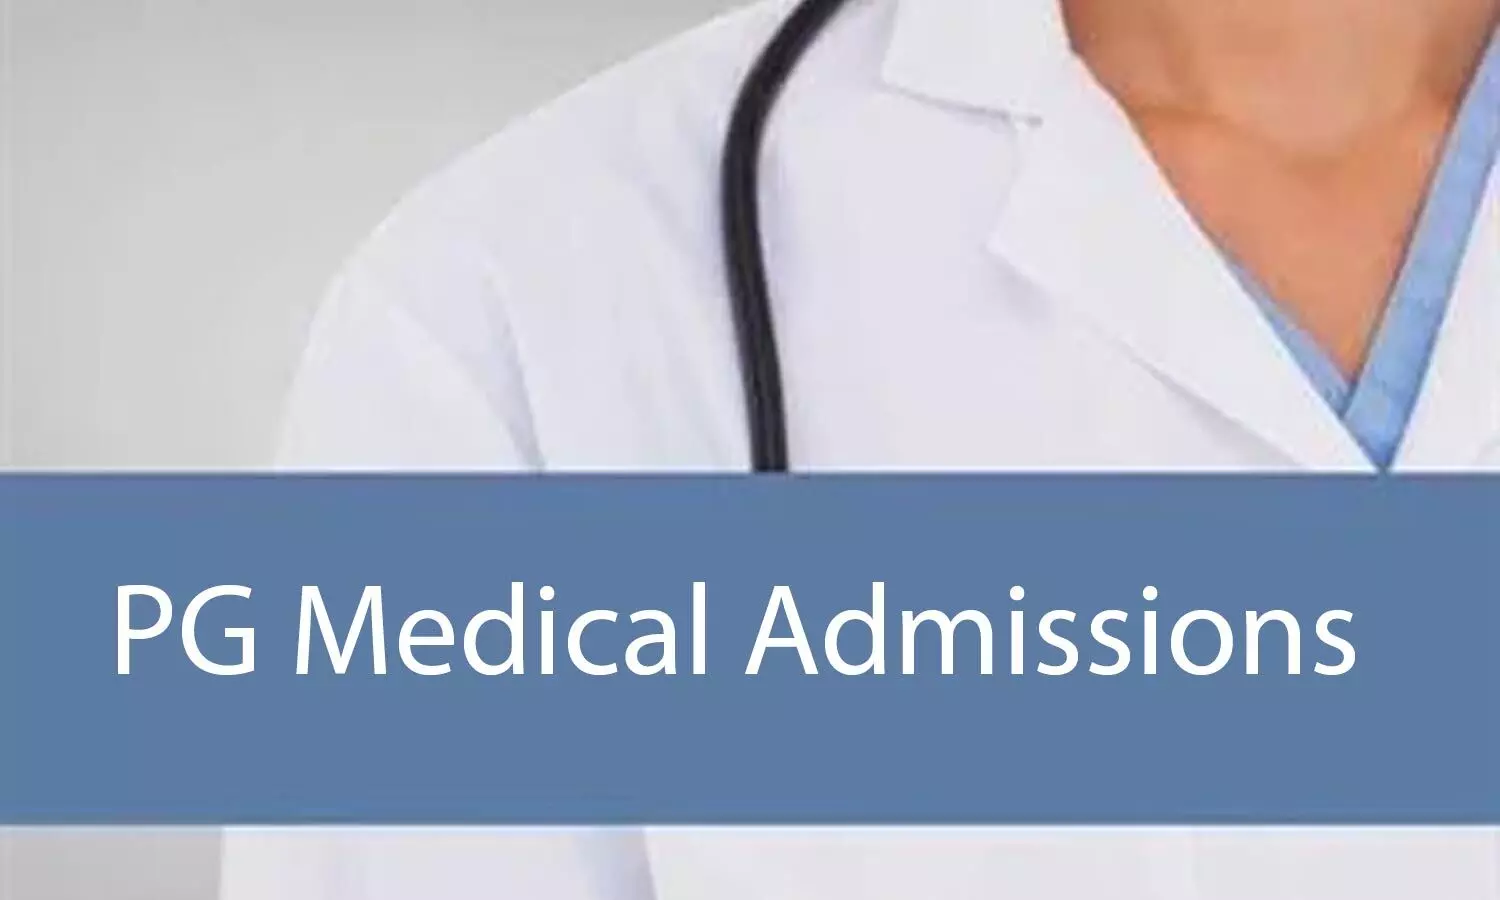 INI CET 2021 for PG medical admissions to AIIMS, JIPMER, PGIMER, NIMHANS: Application window open till 31st March